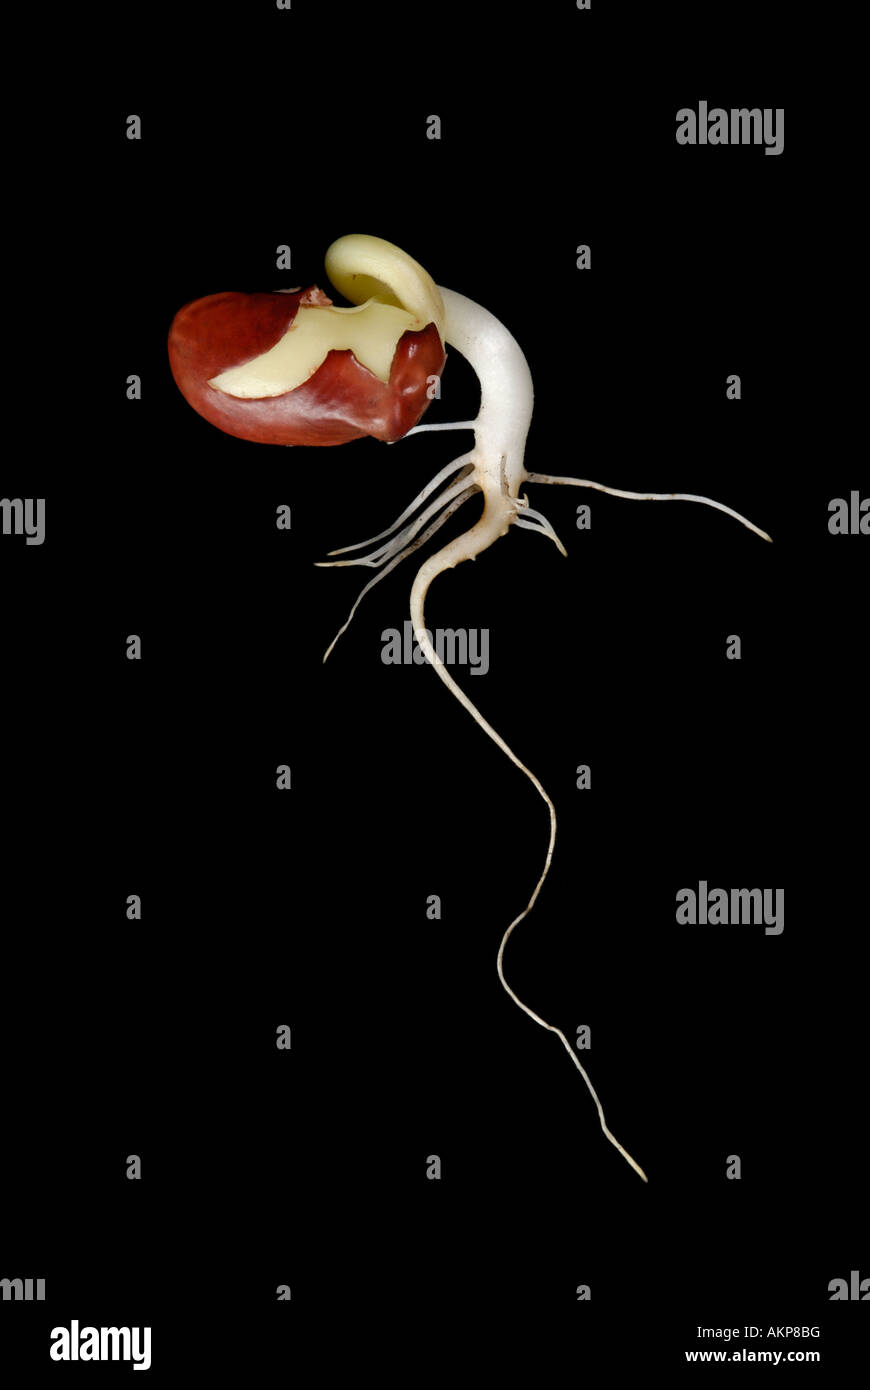 Bean seedling sprout with roots Stock Photo